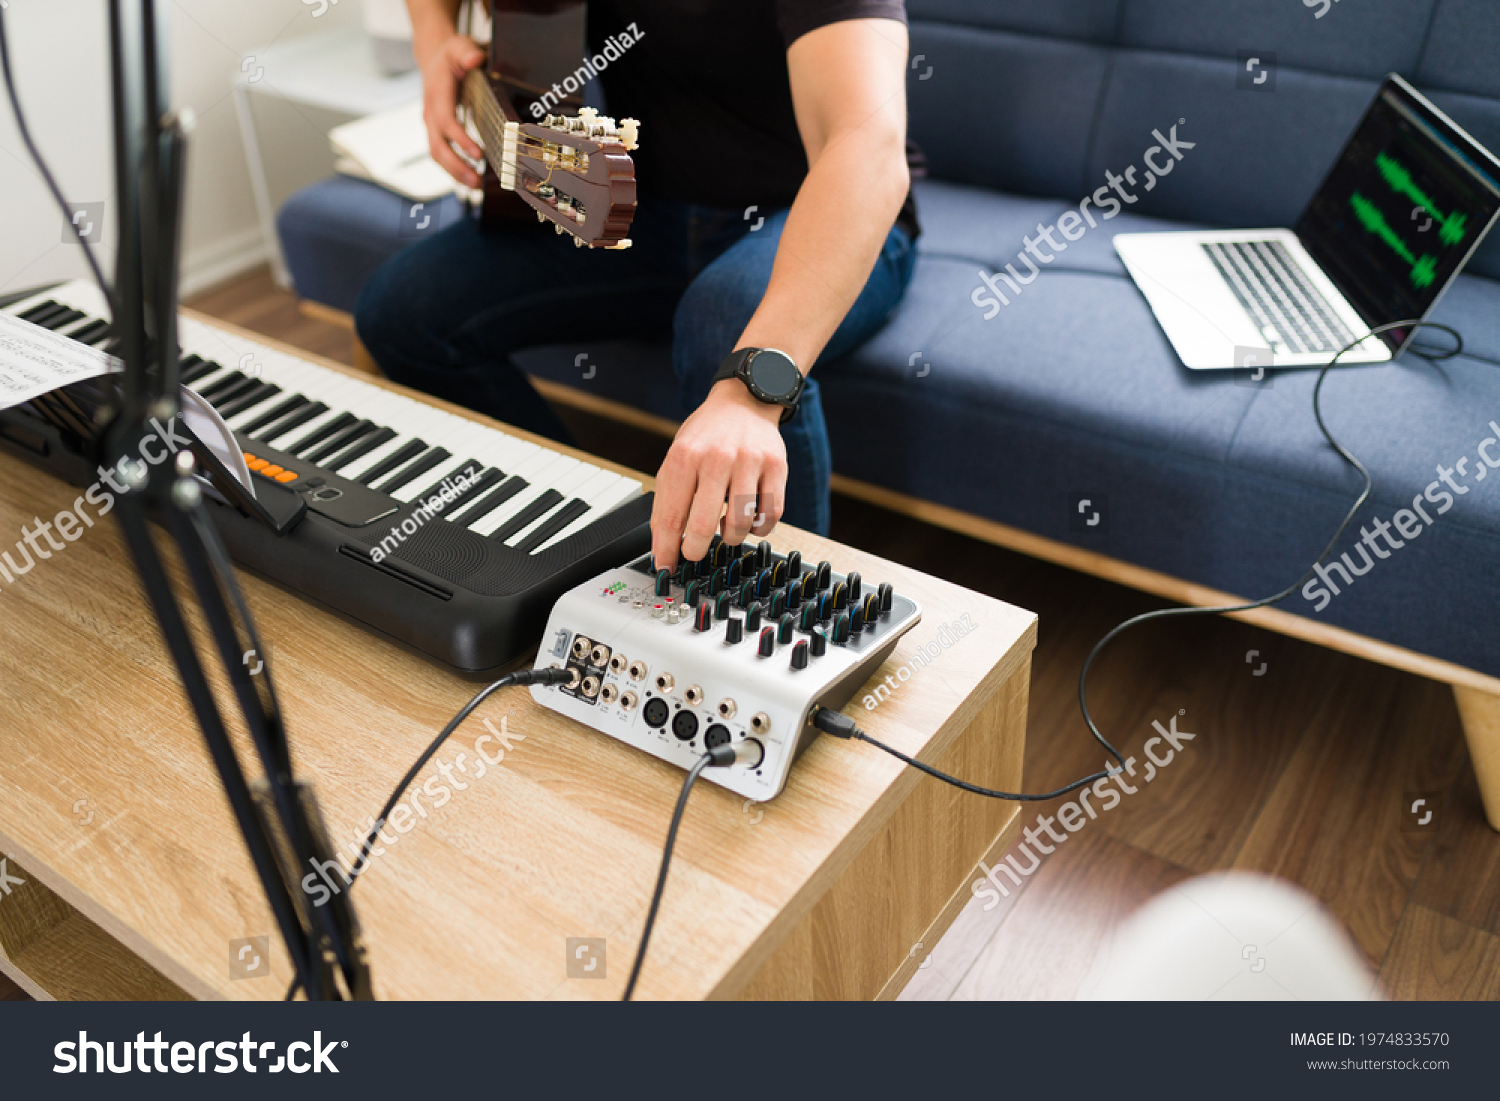 stock-photo-close-up-of-a-young-musician-mixing-his-song-with-a-sound-mixer-to-record-new-music-with-an-1974833570